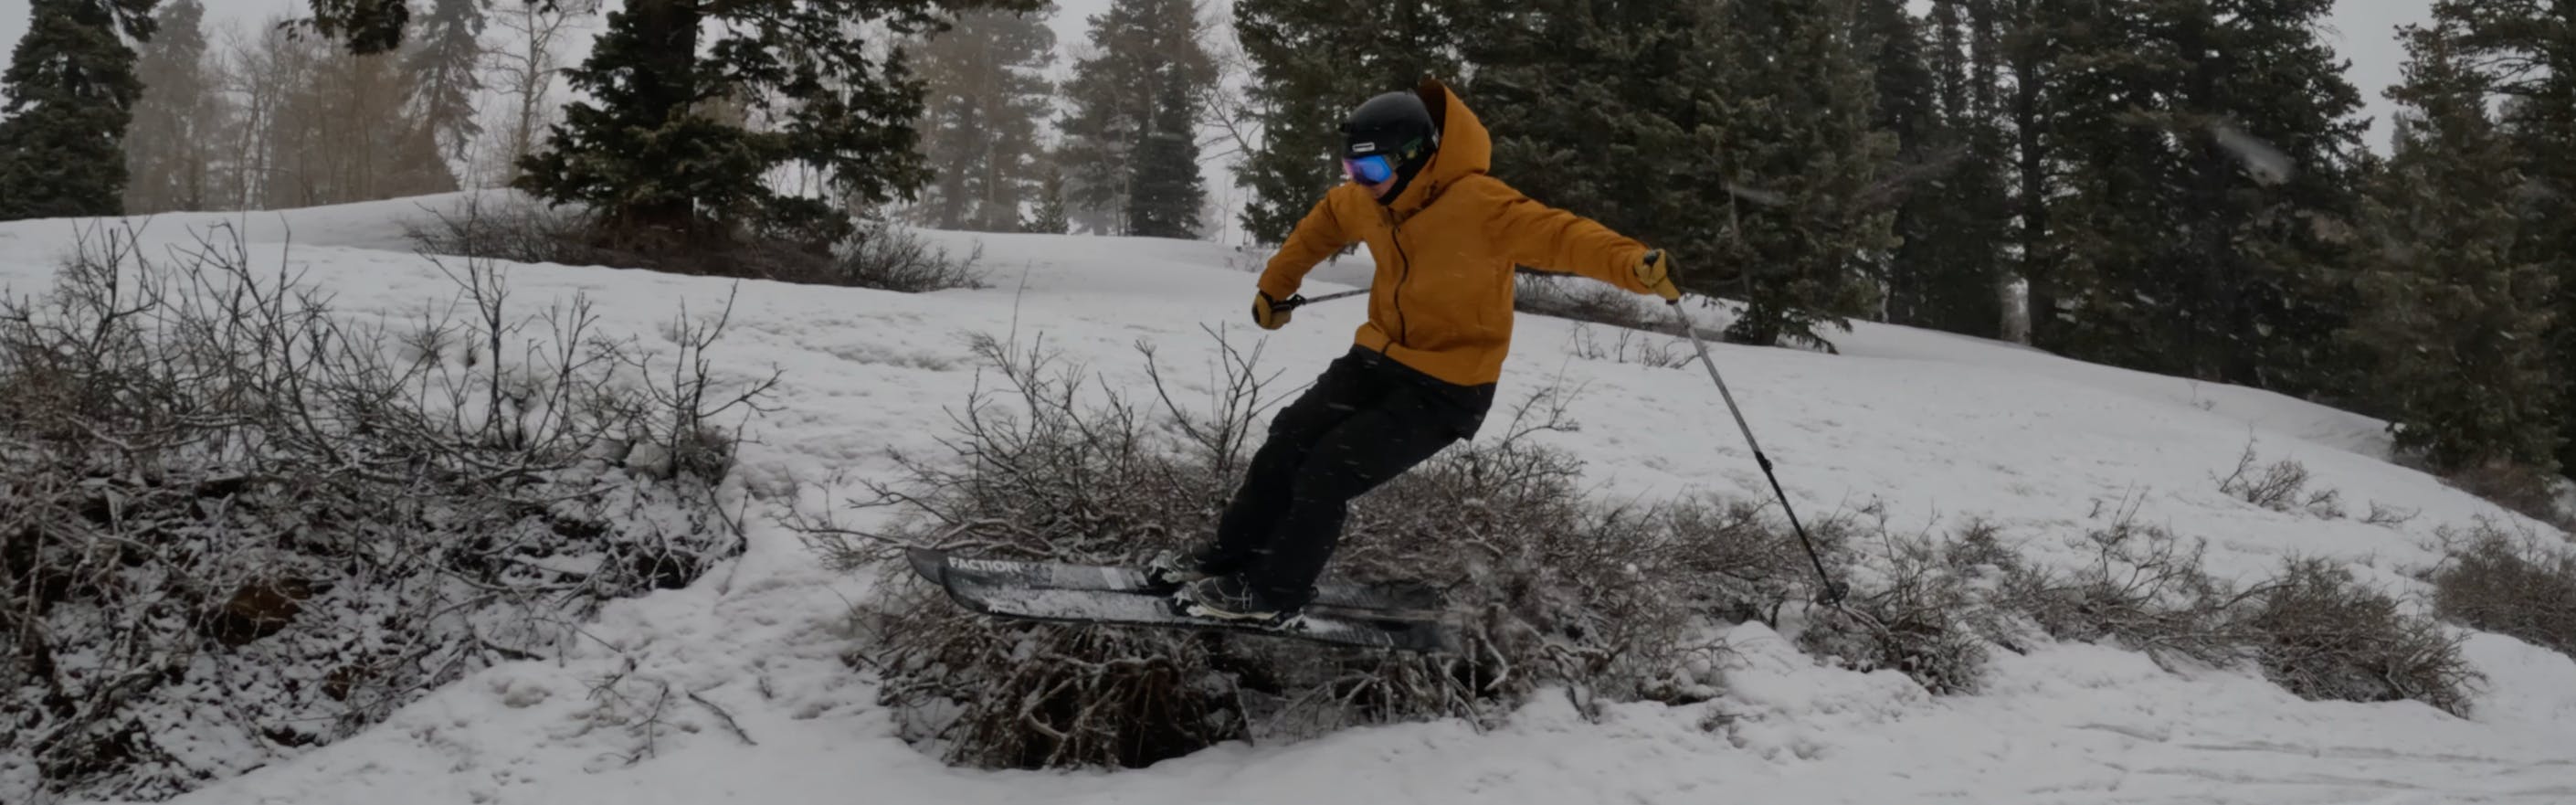 Curated Ski Expert Brandon Westburg jumping on the Faction Mana 2.0 skis